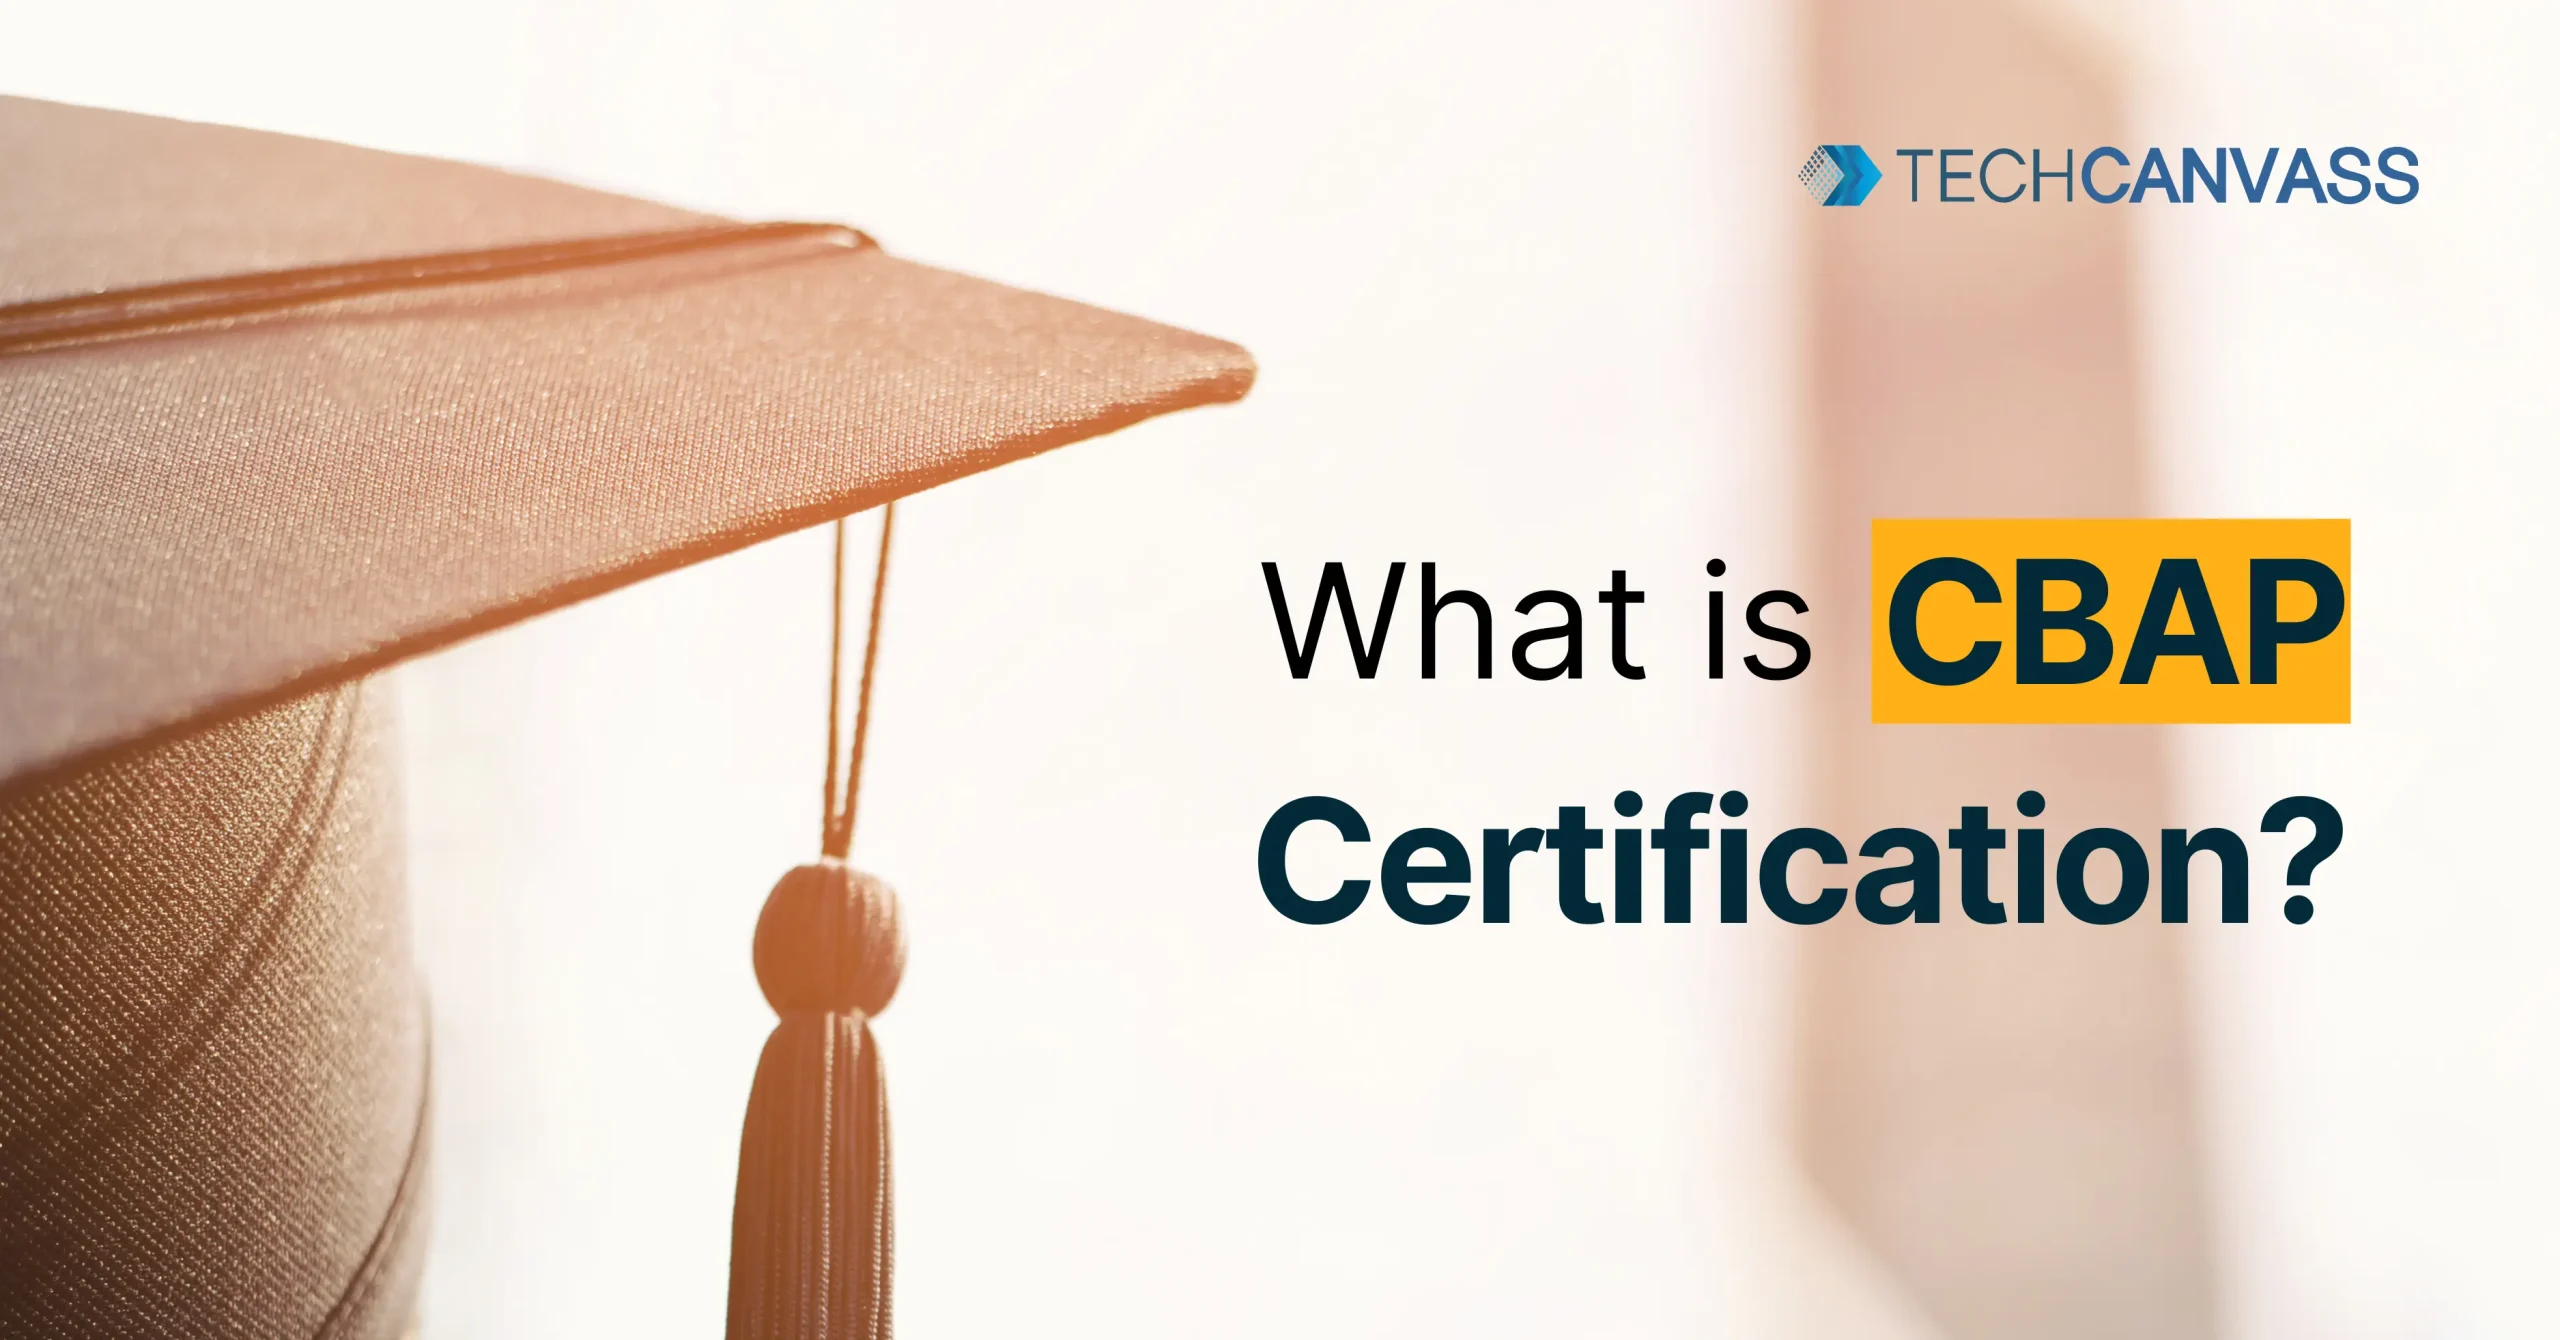 What is CBAP Certification